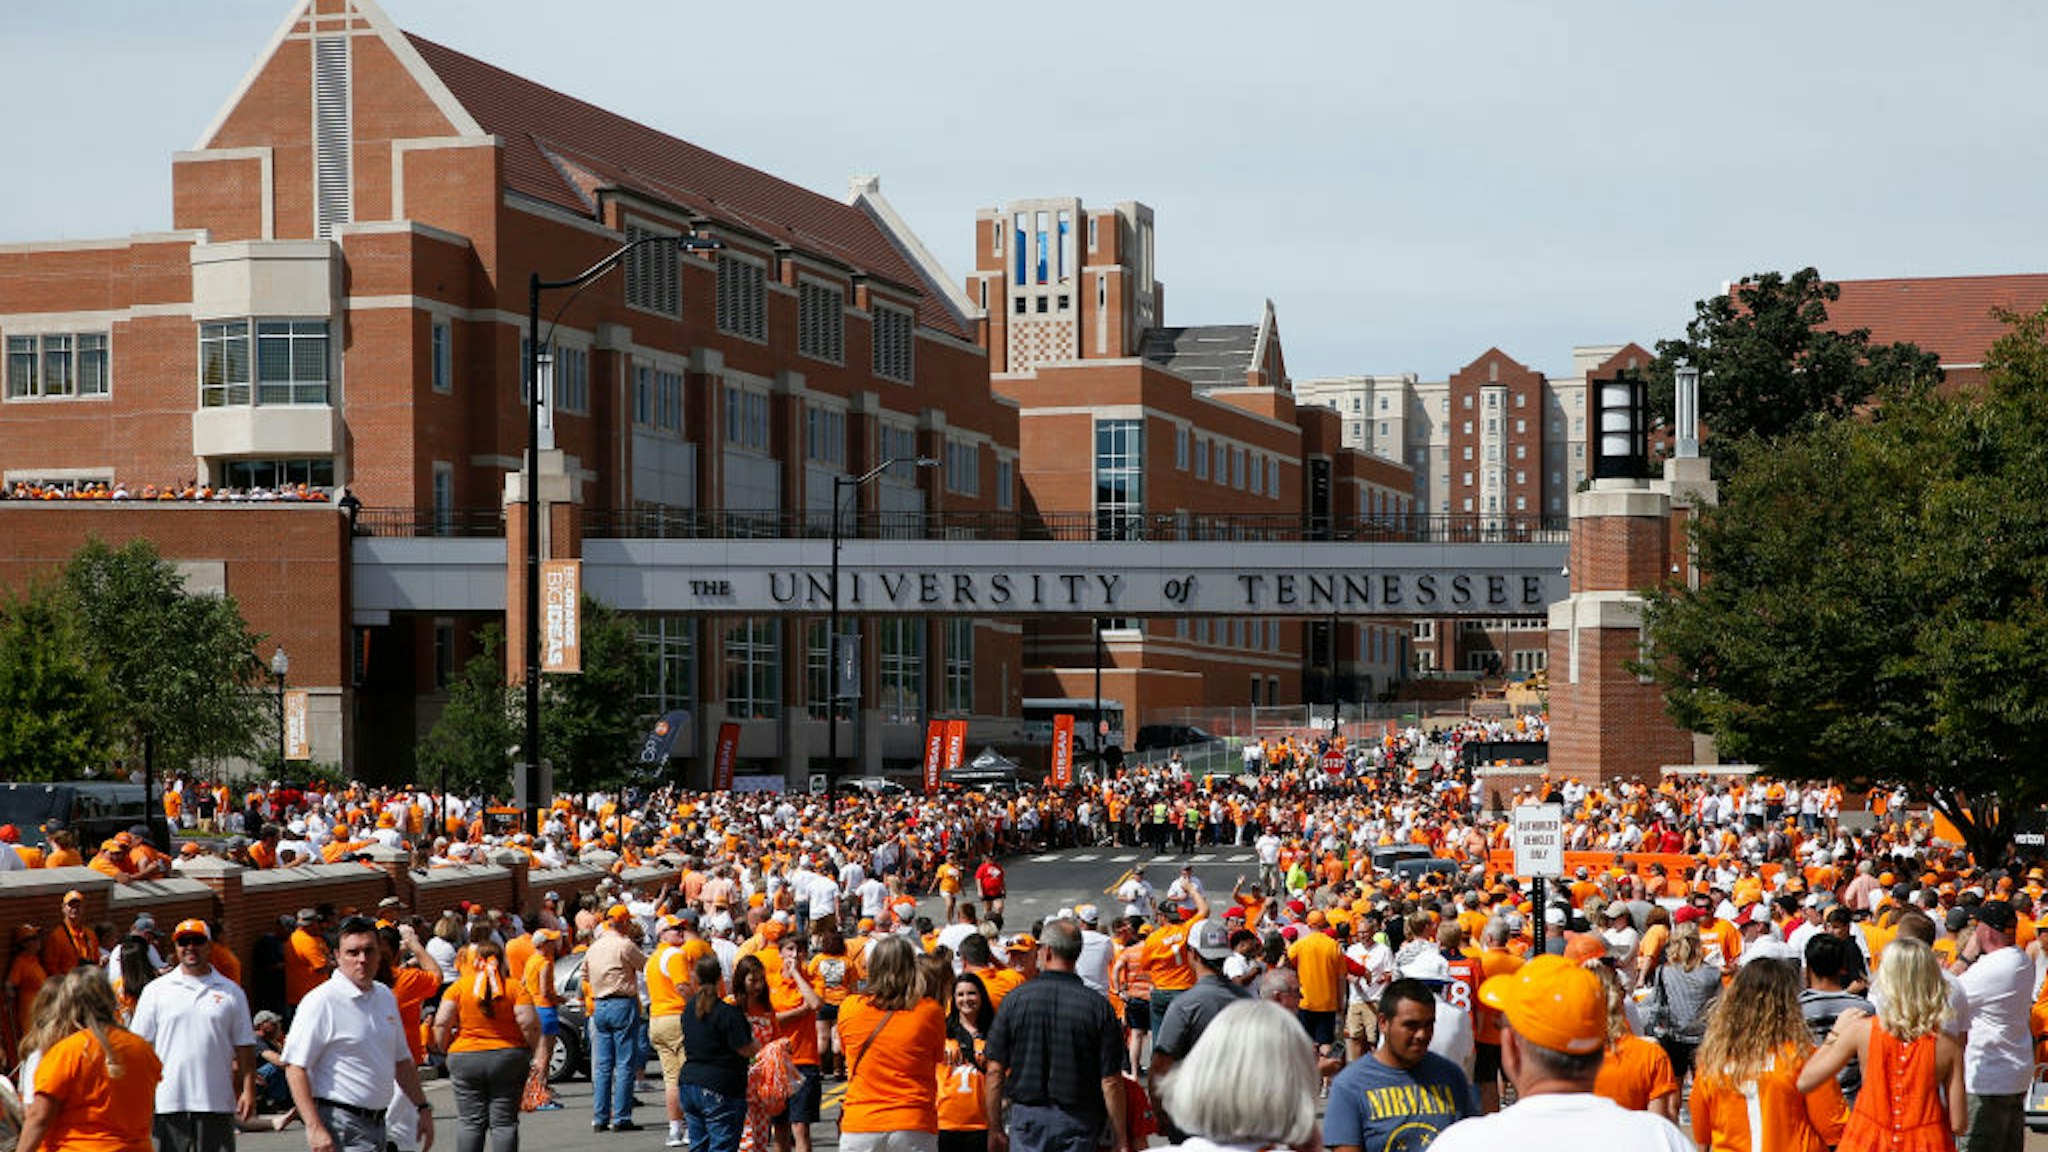 KNOXVILLE, TN - SEPTEMBER 30: General view as fans congregate along Phillip Fulmer Way near campus prior to a game between the Tennessee Volunteers and Georgia Bulldogs at Neyland Stadium on September 30, 2017 in Knoxville, Tennessee.